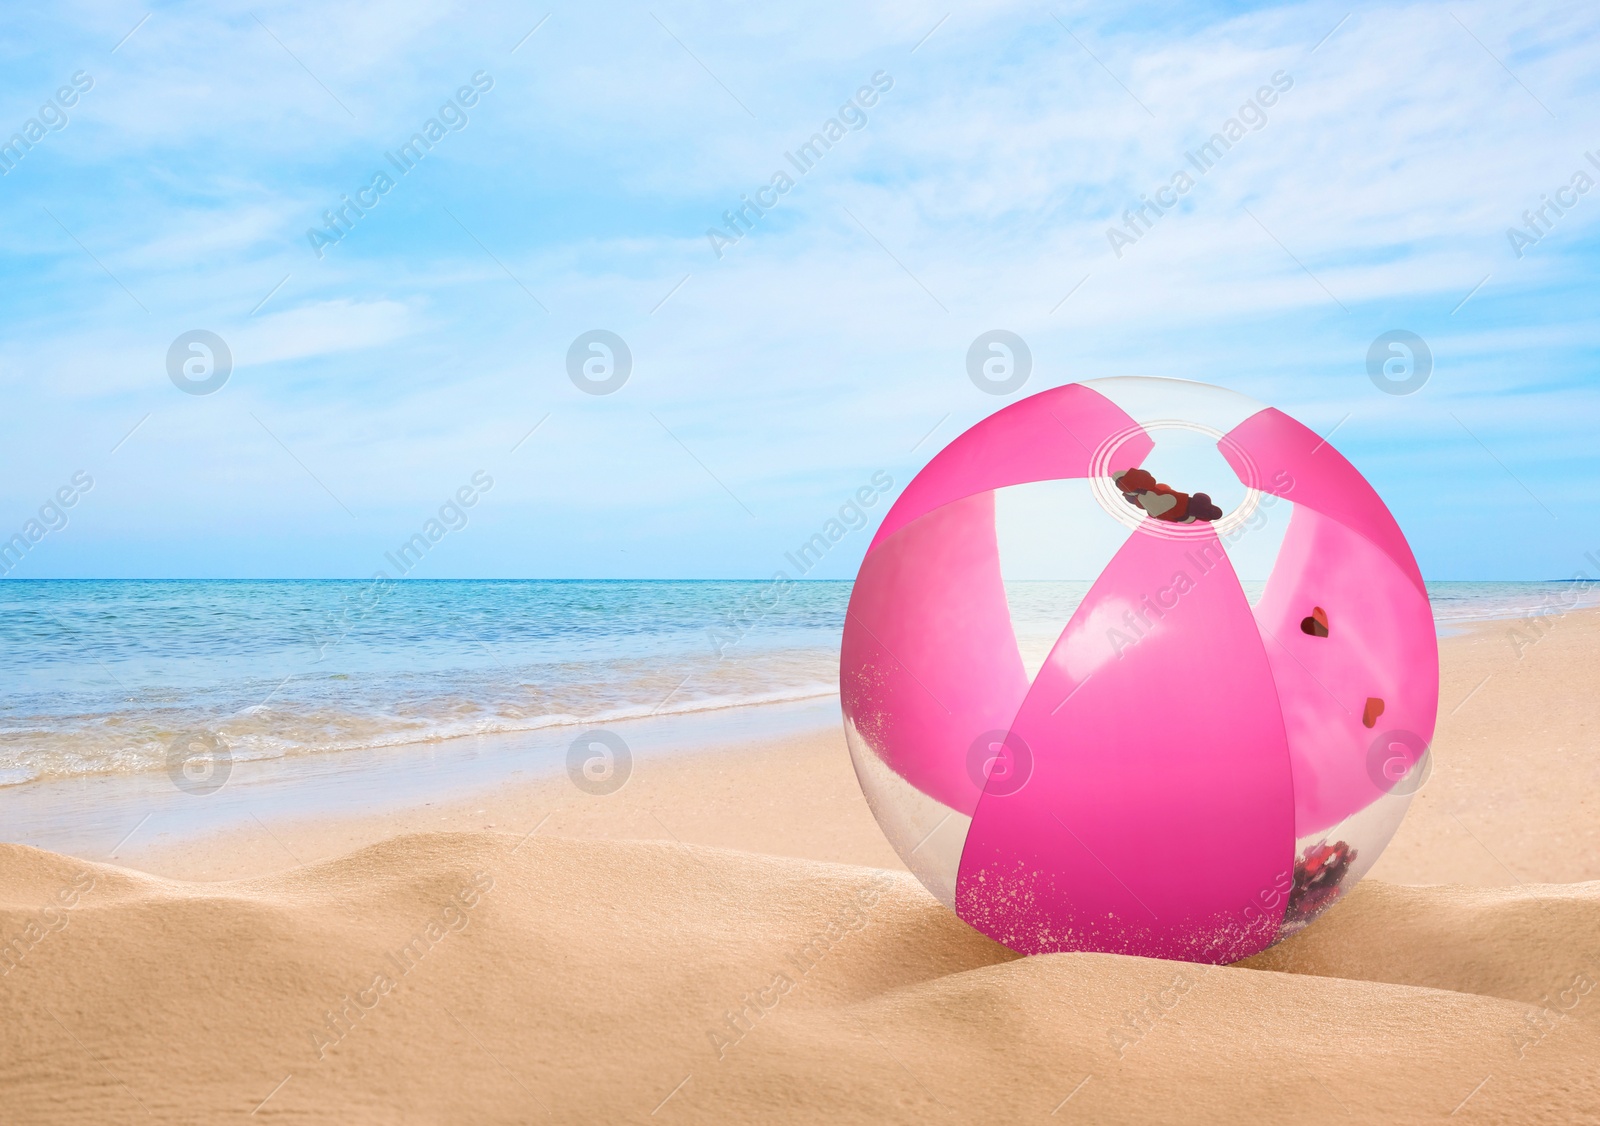 Image of Pink beach ball on sandy coast near sea, space for text 